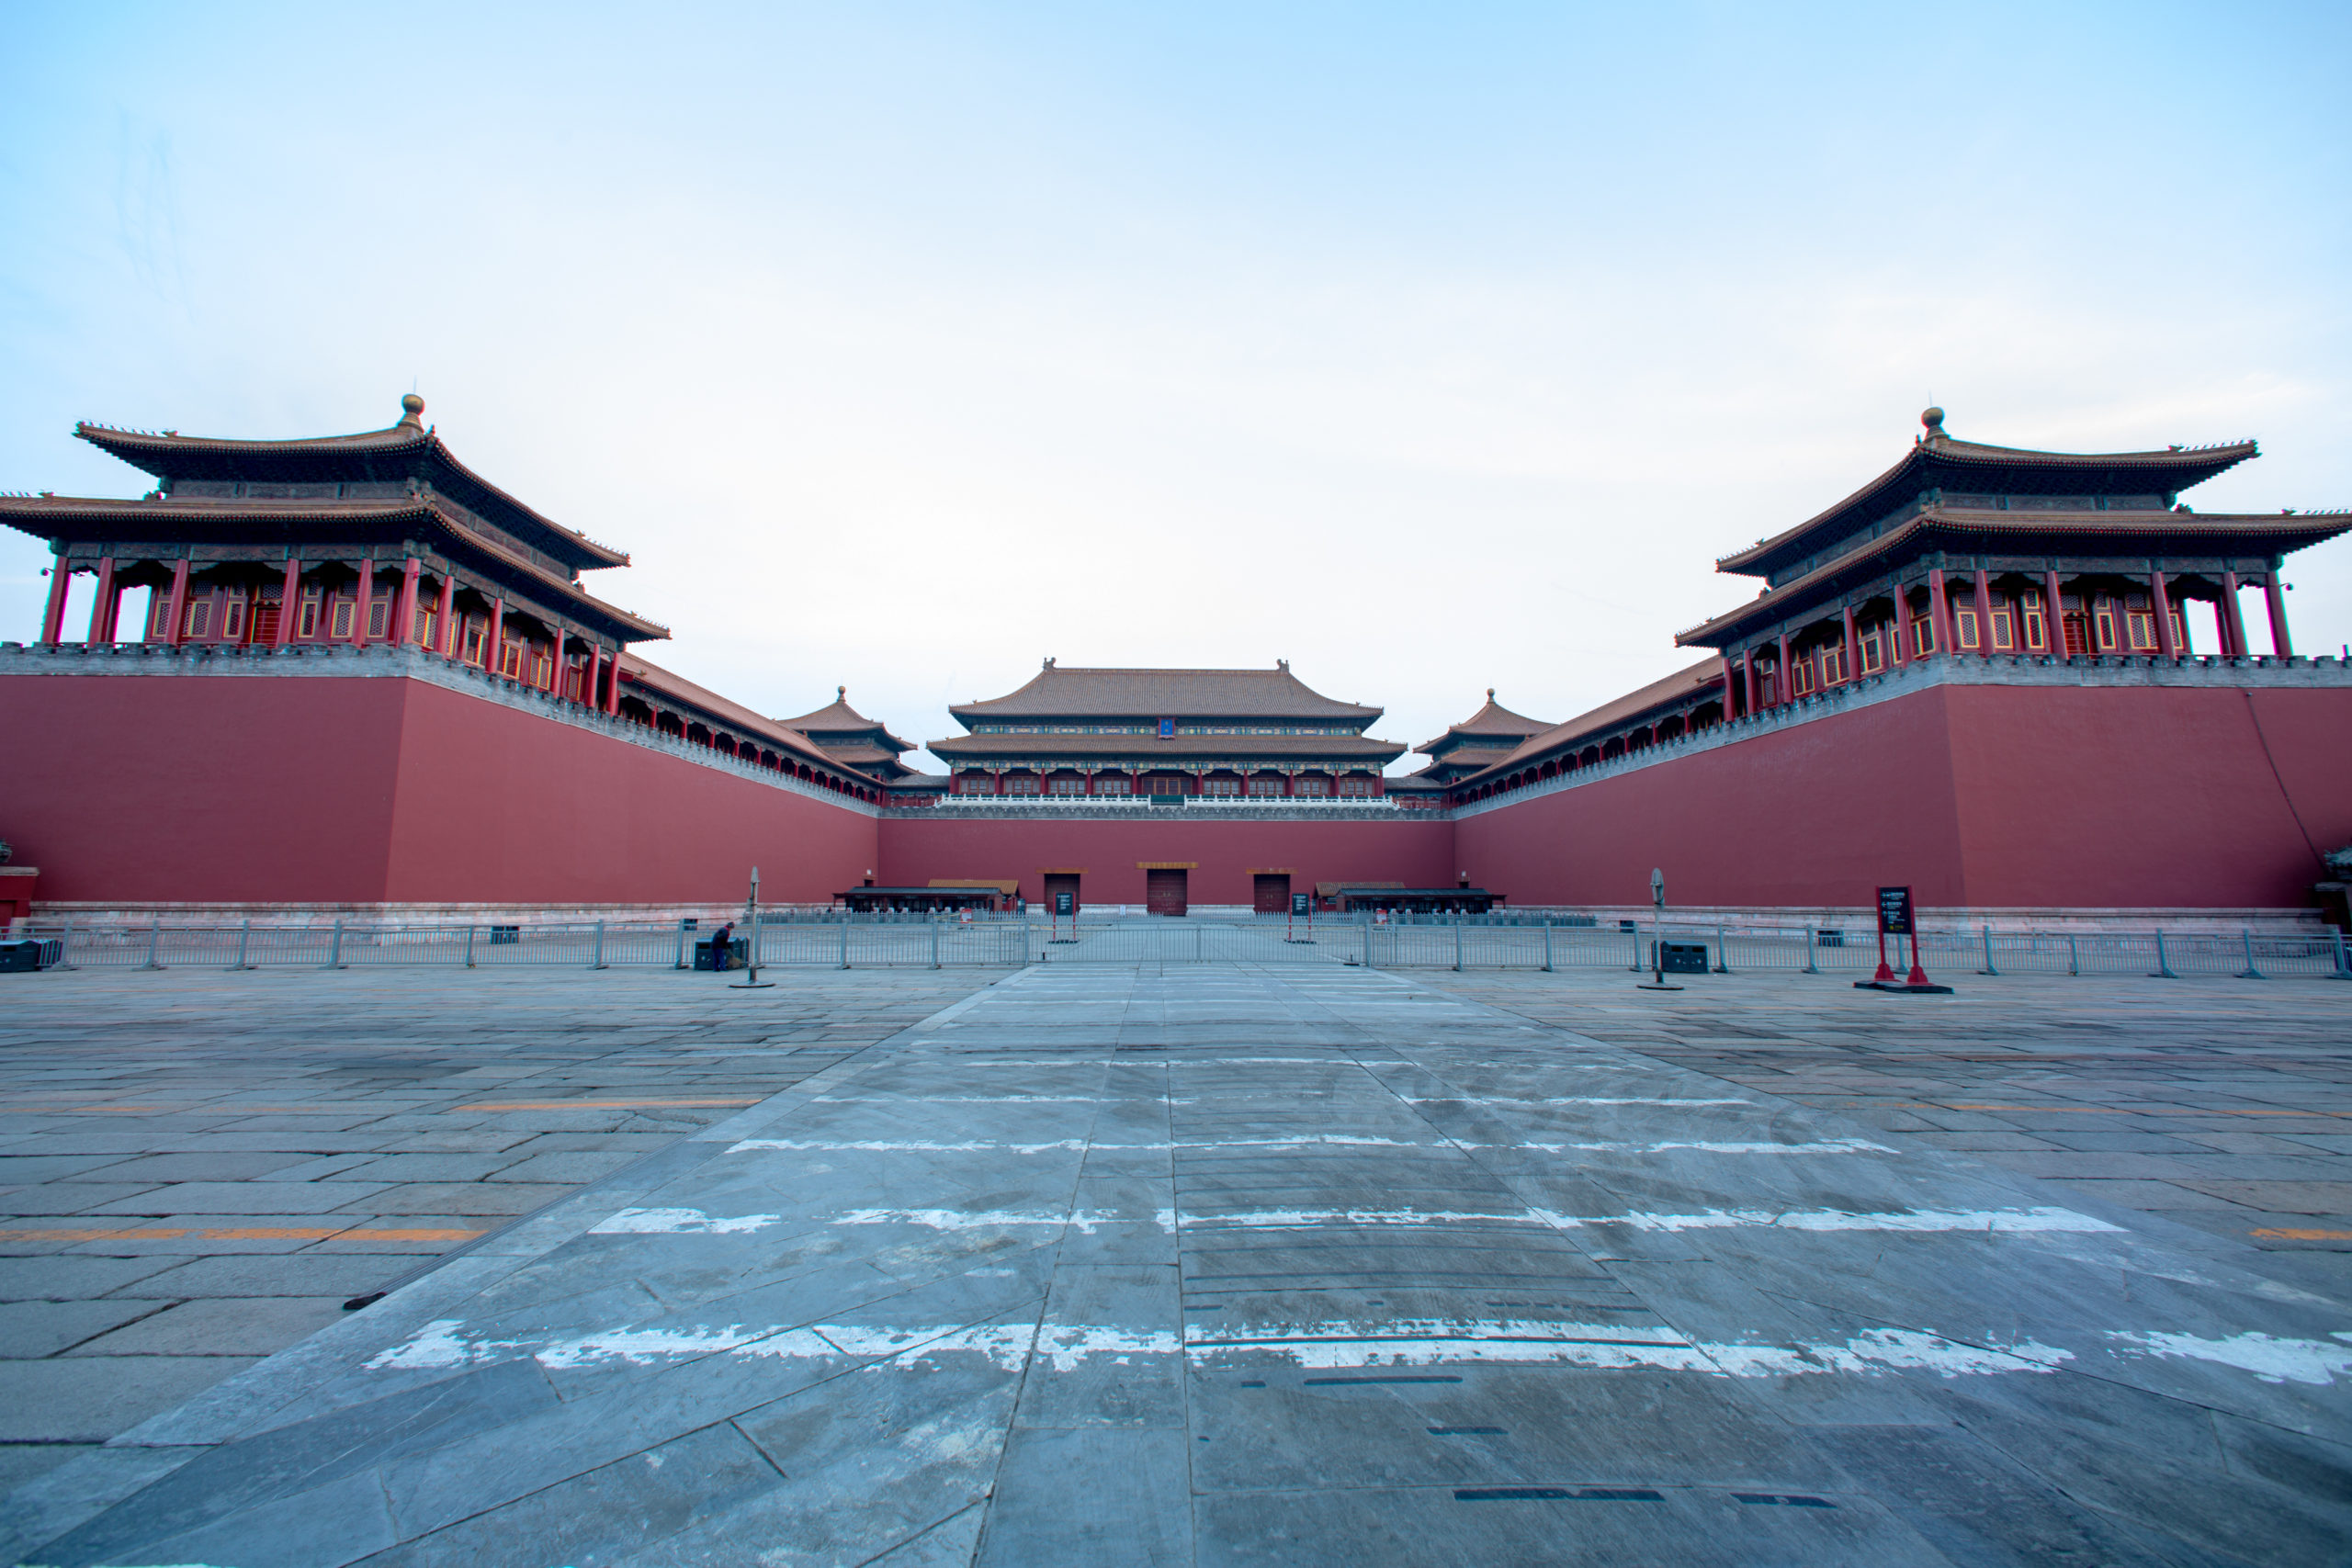 The Ultimate Guide to Visiting The Forbidden City